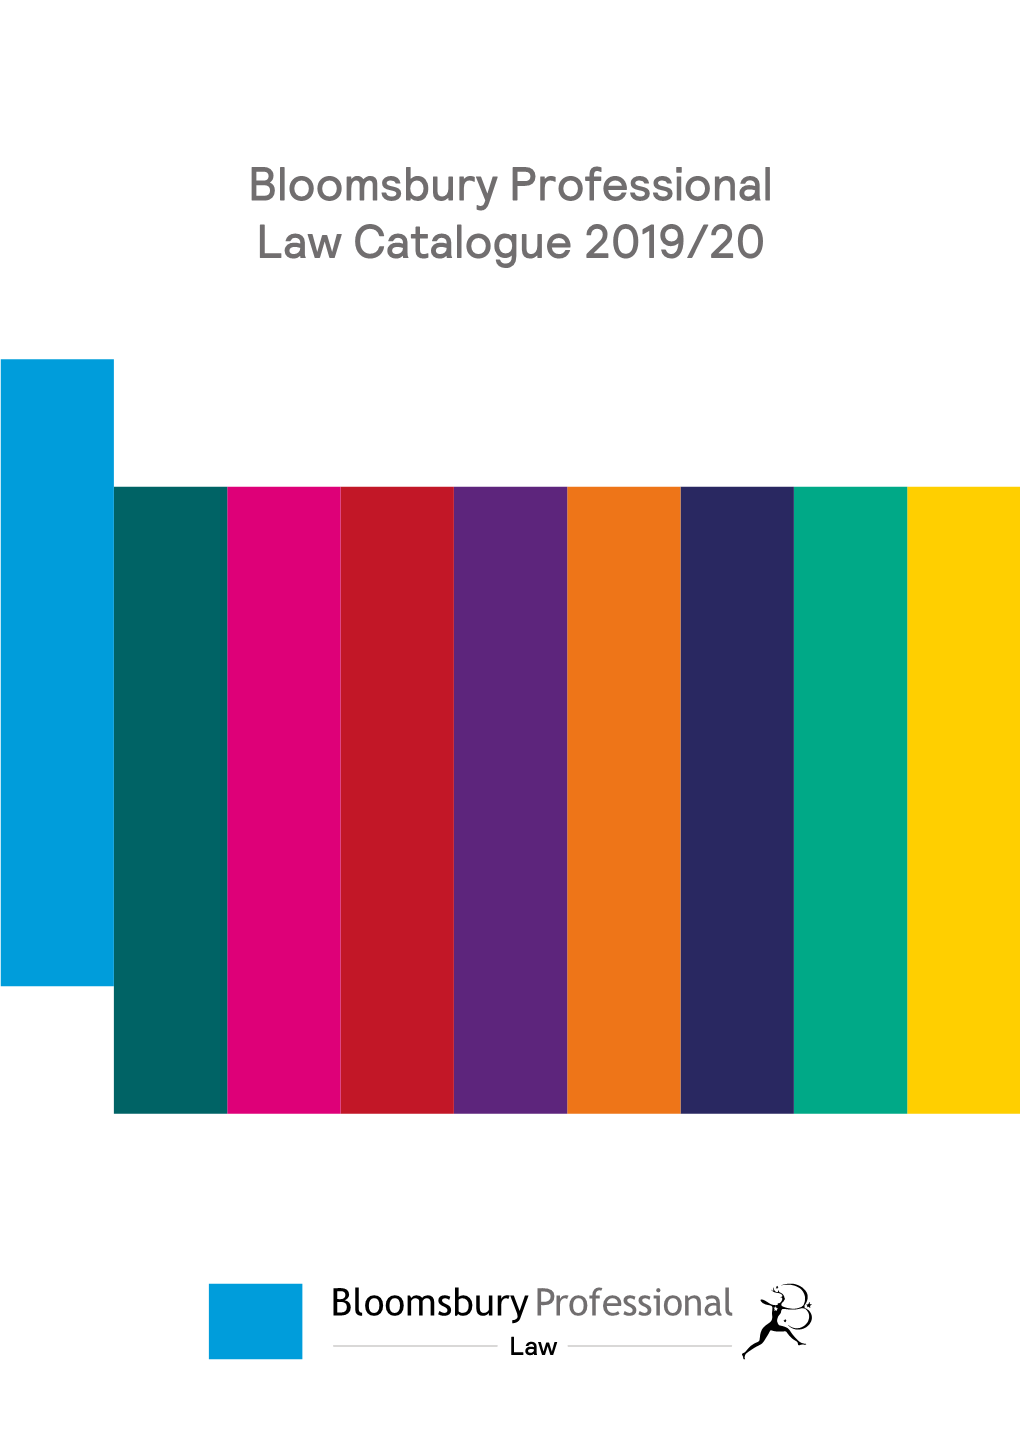 Bloomsbury Professional Law Catalogue 2019/20 UK Law I AM VERY PLEASED to WELCOME YOU to the NEW BLOOMSBURY PROFESSIONAL LAW CATALOGUE